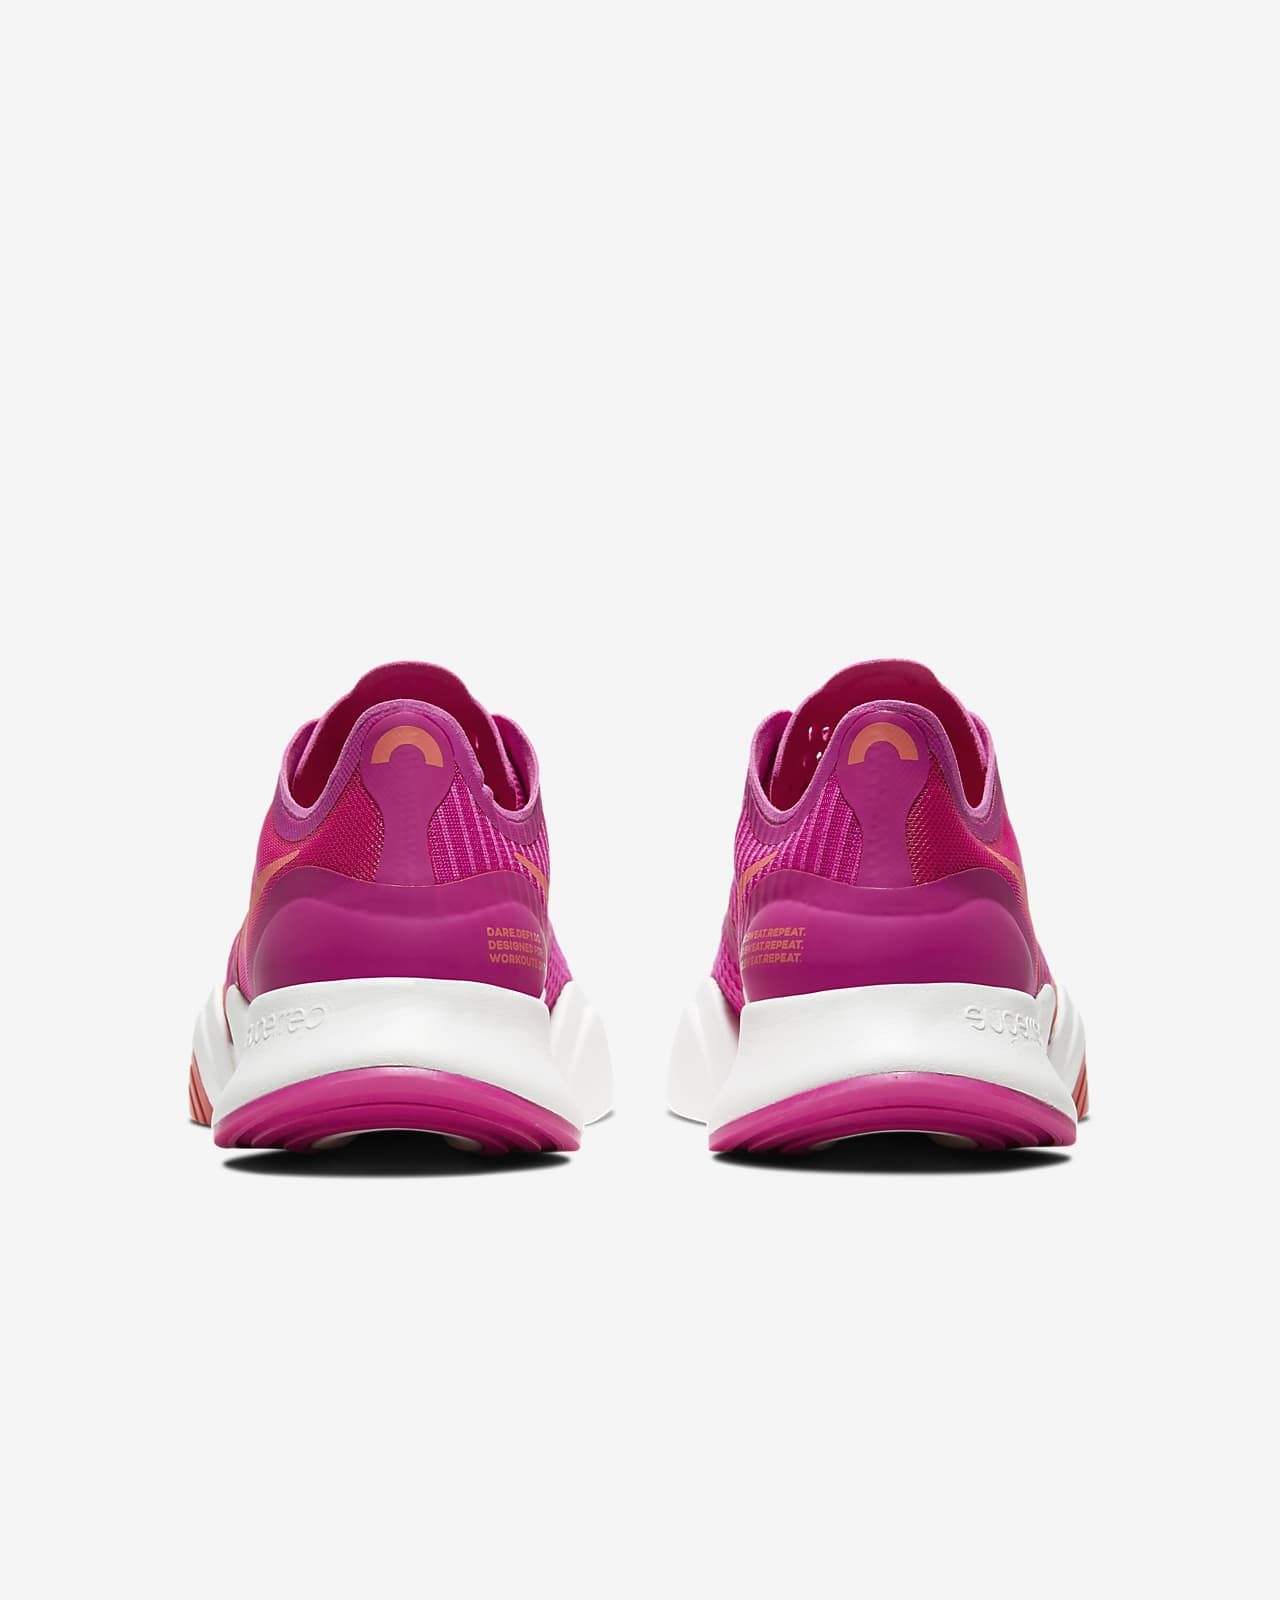 nike women's shoes pink and purple